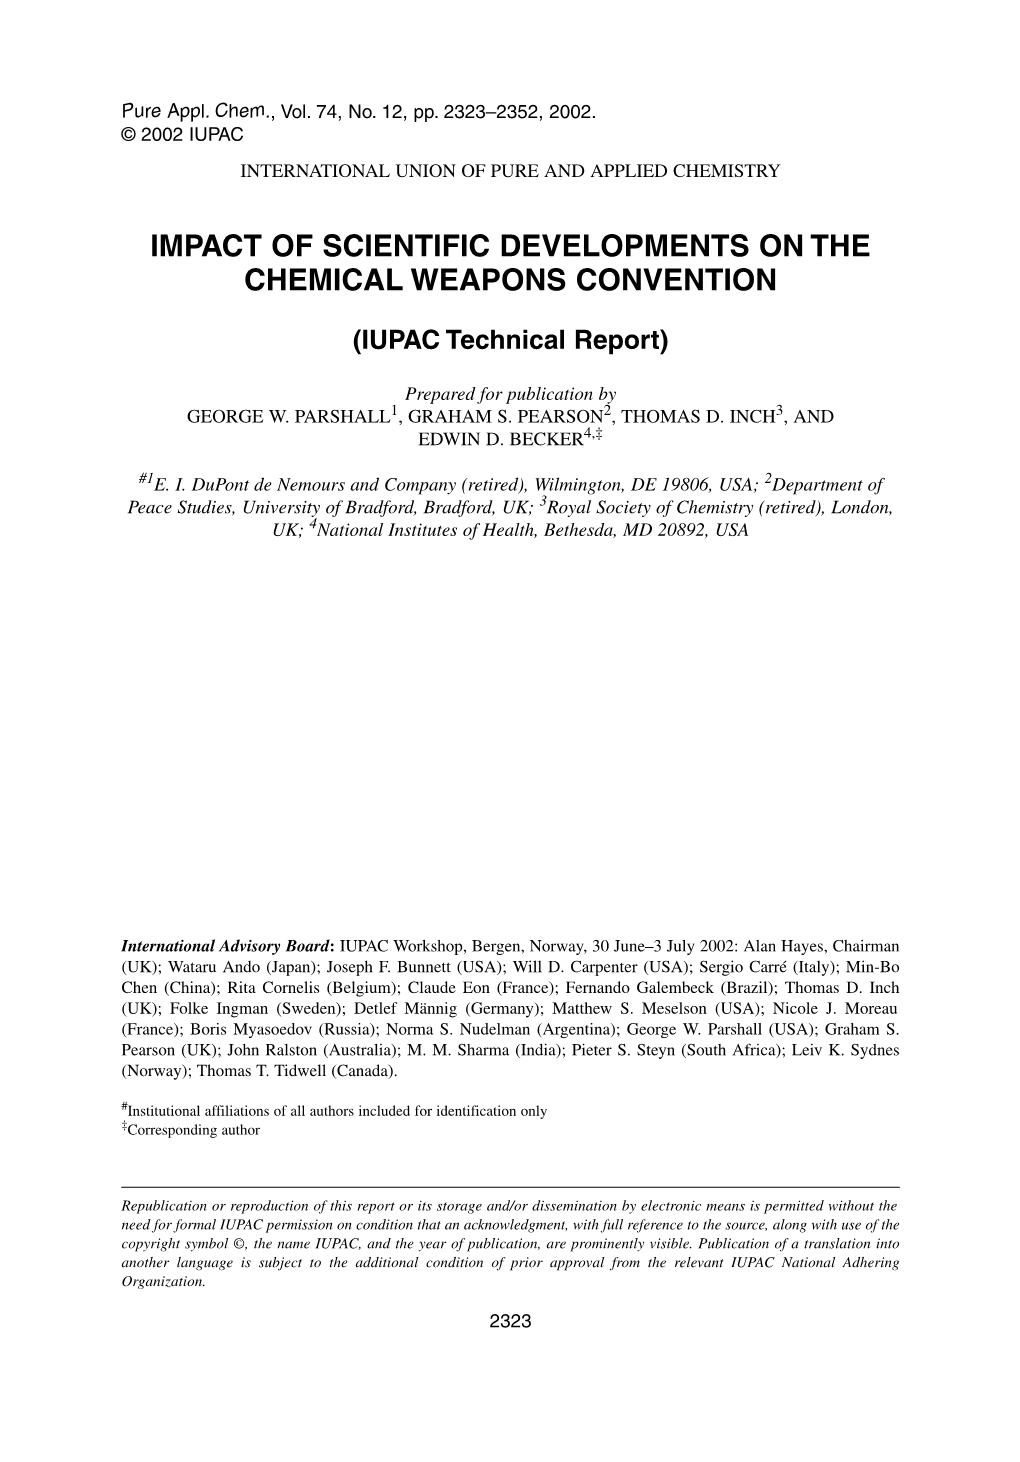 Impact of Scientific Developments on the Chemical Weapons Convention